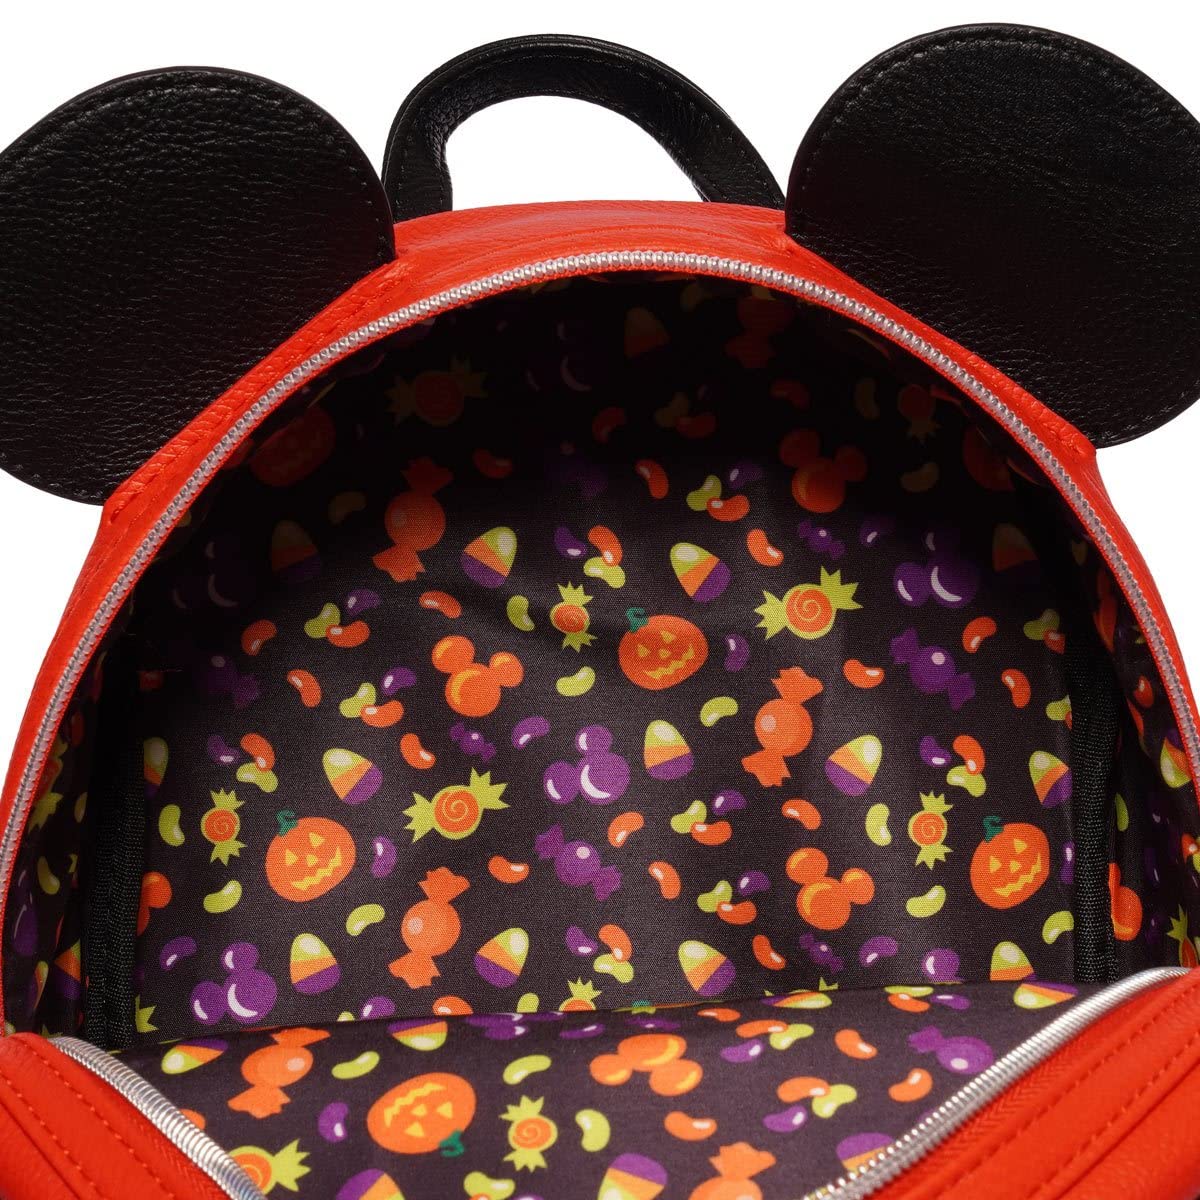 Loungefly Disney Mickey Mouse Devil Mickey Mini Backpack - Entertainment Earth Exclusive